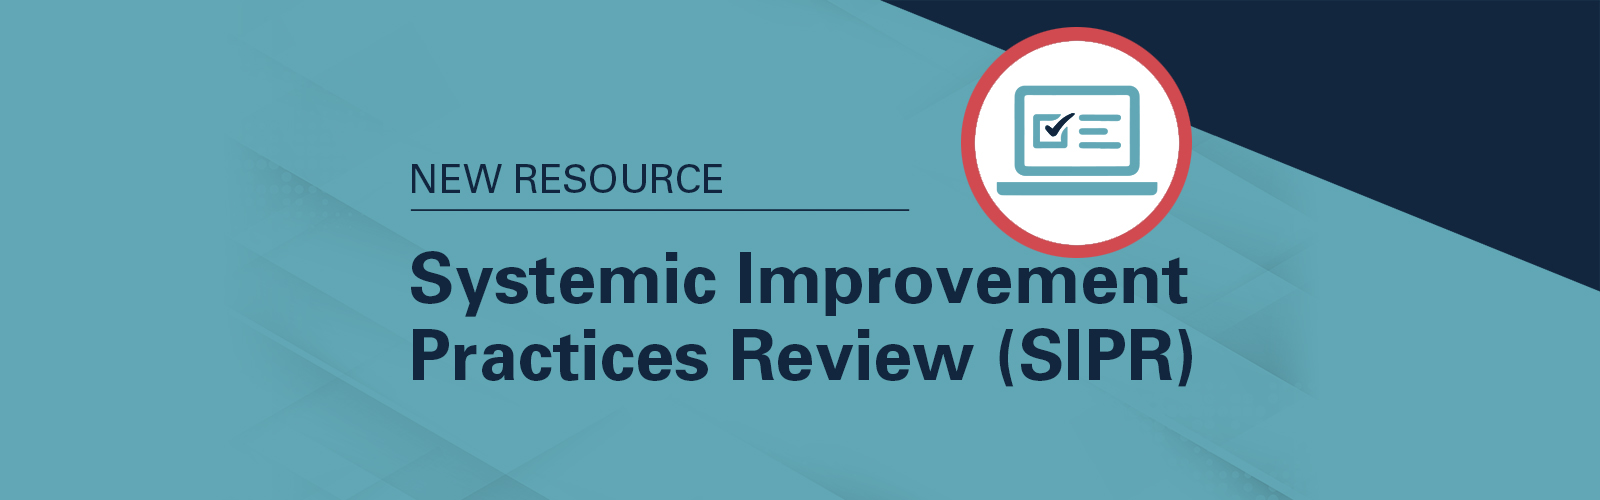 Systemic Improvement Practices Review (SIPR)